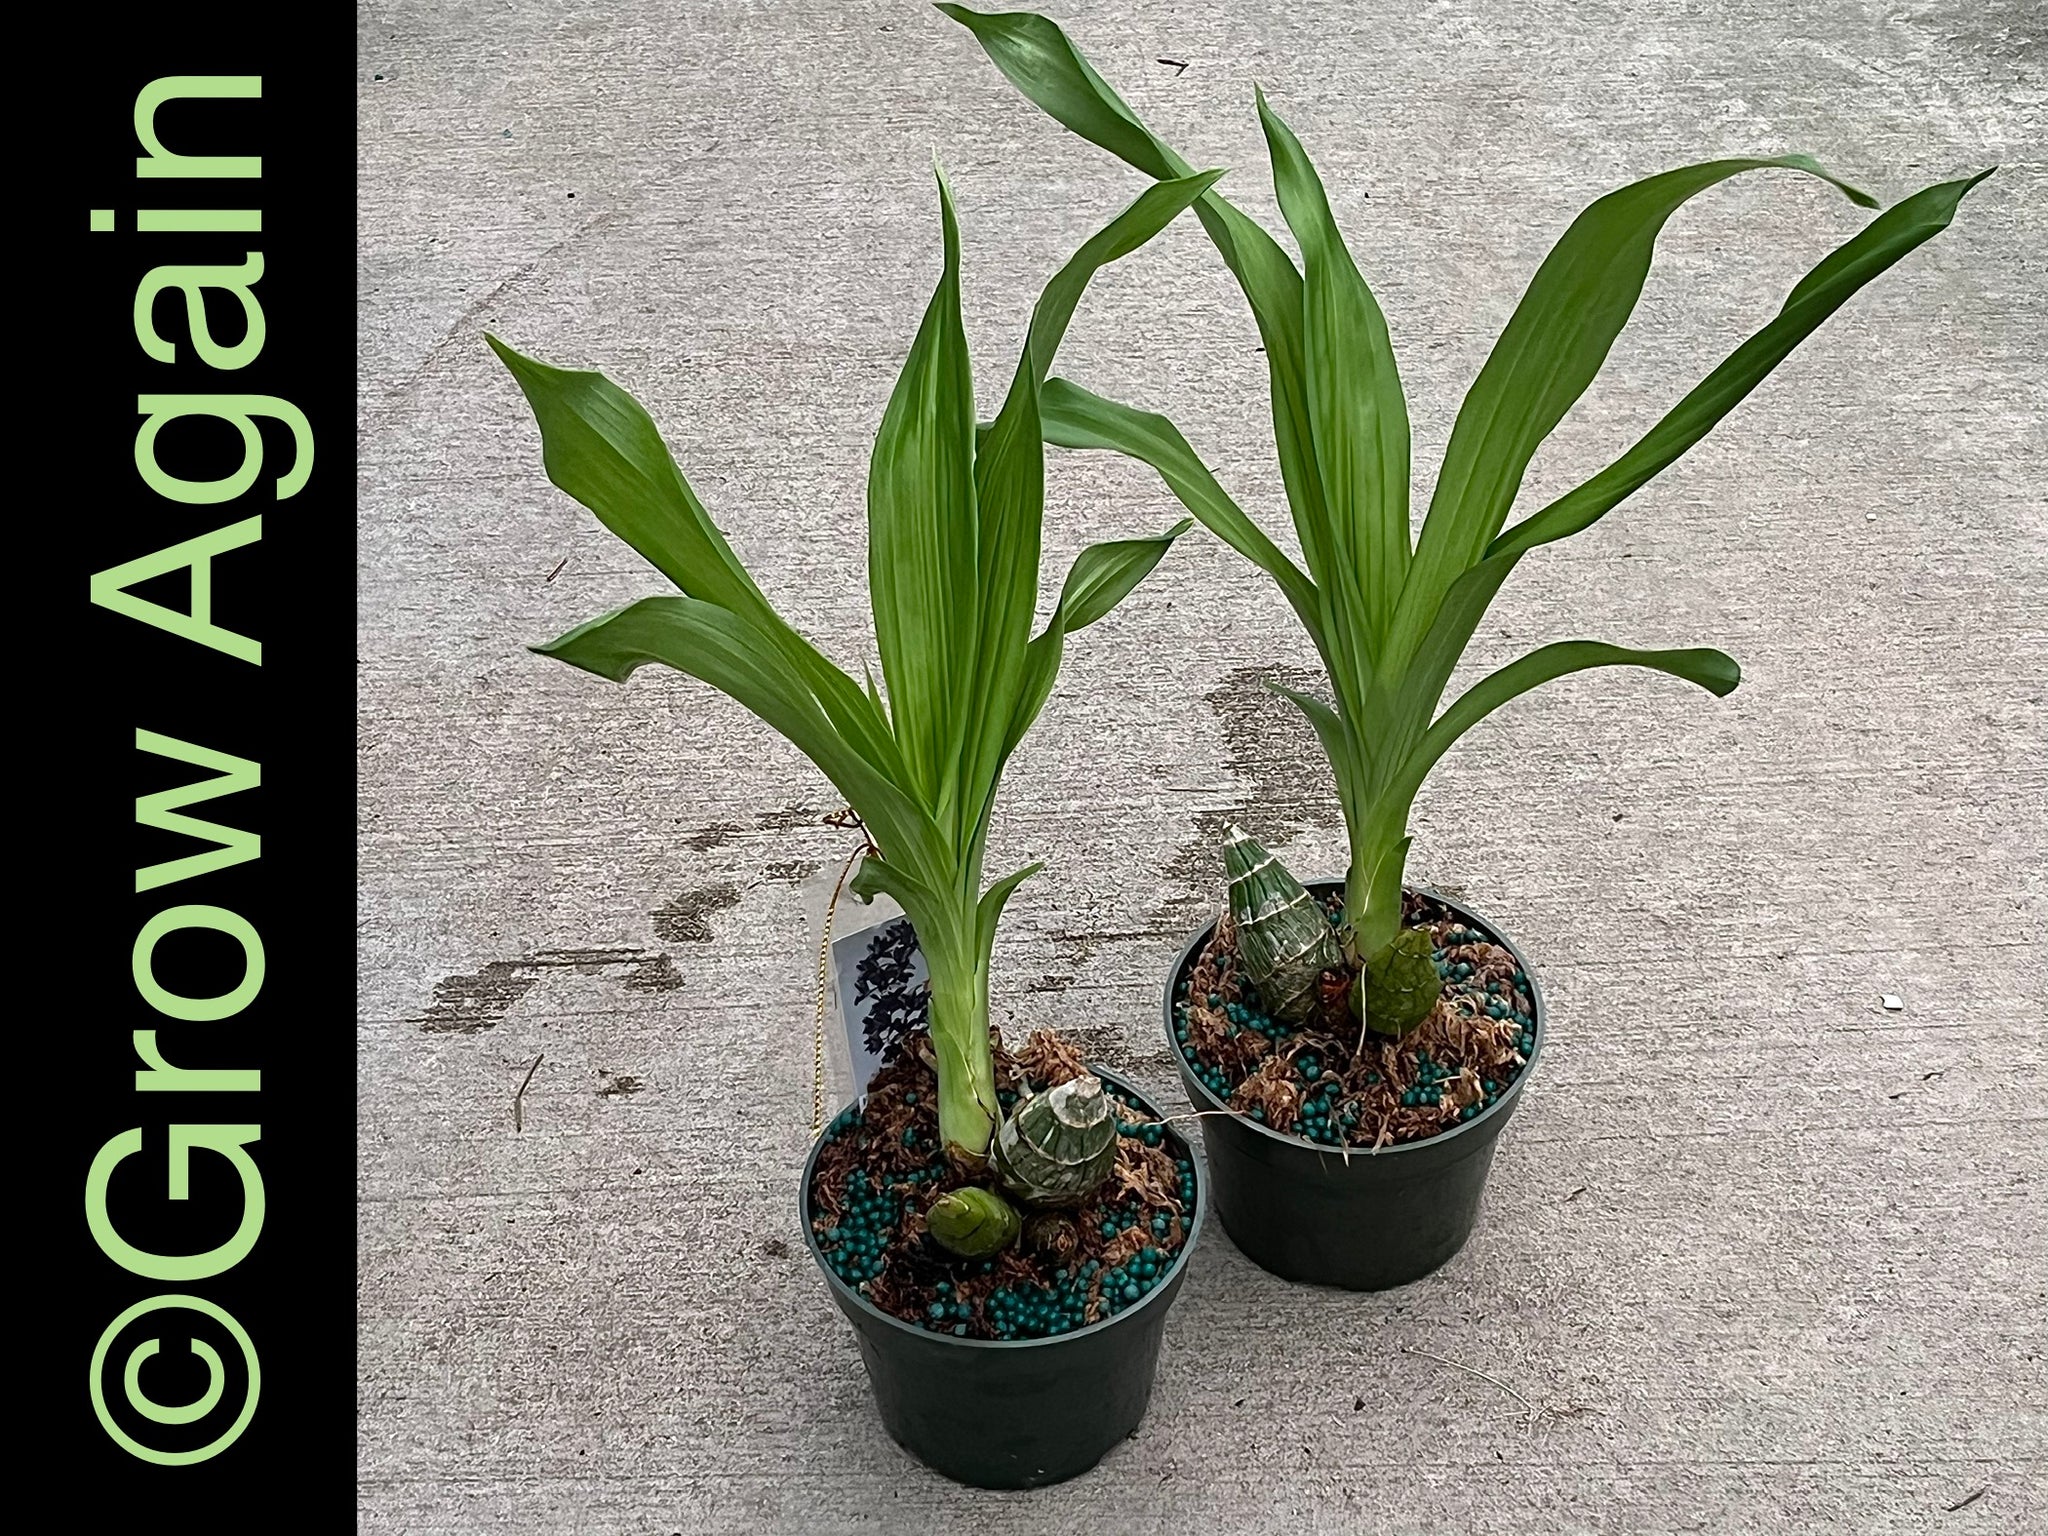 Ctsm. Fdk After Dark 'SVO Black Pearl' – Grow Again Orchids